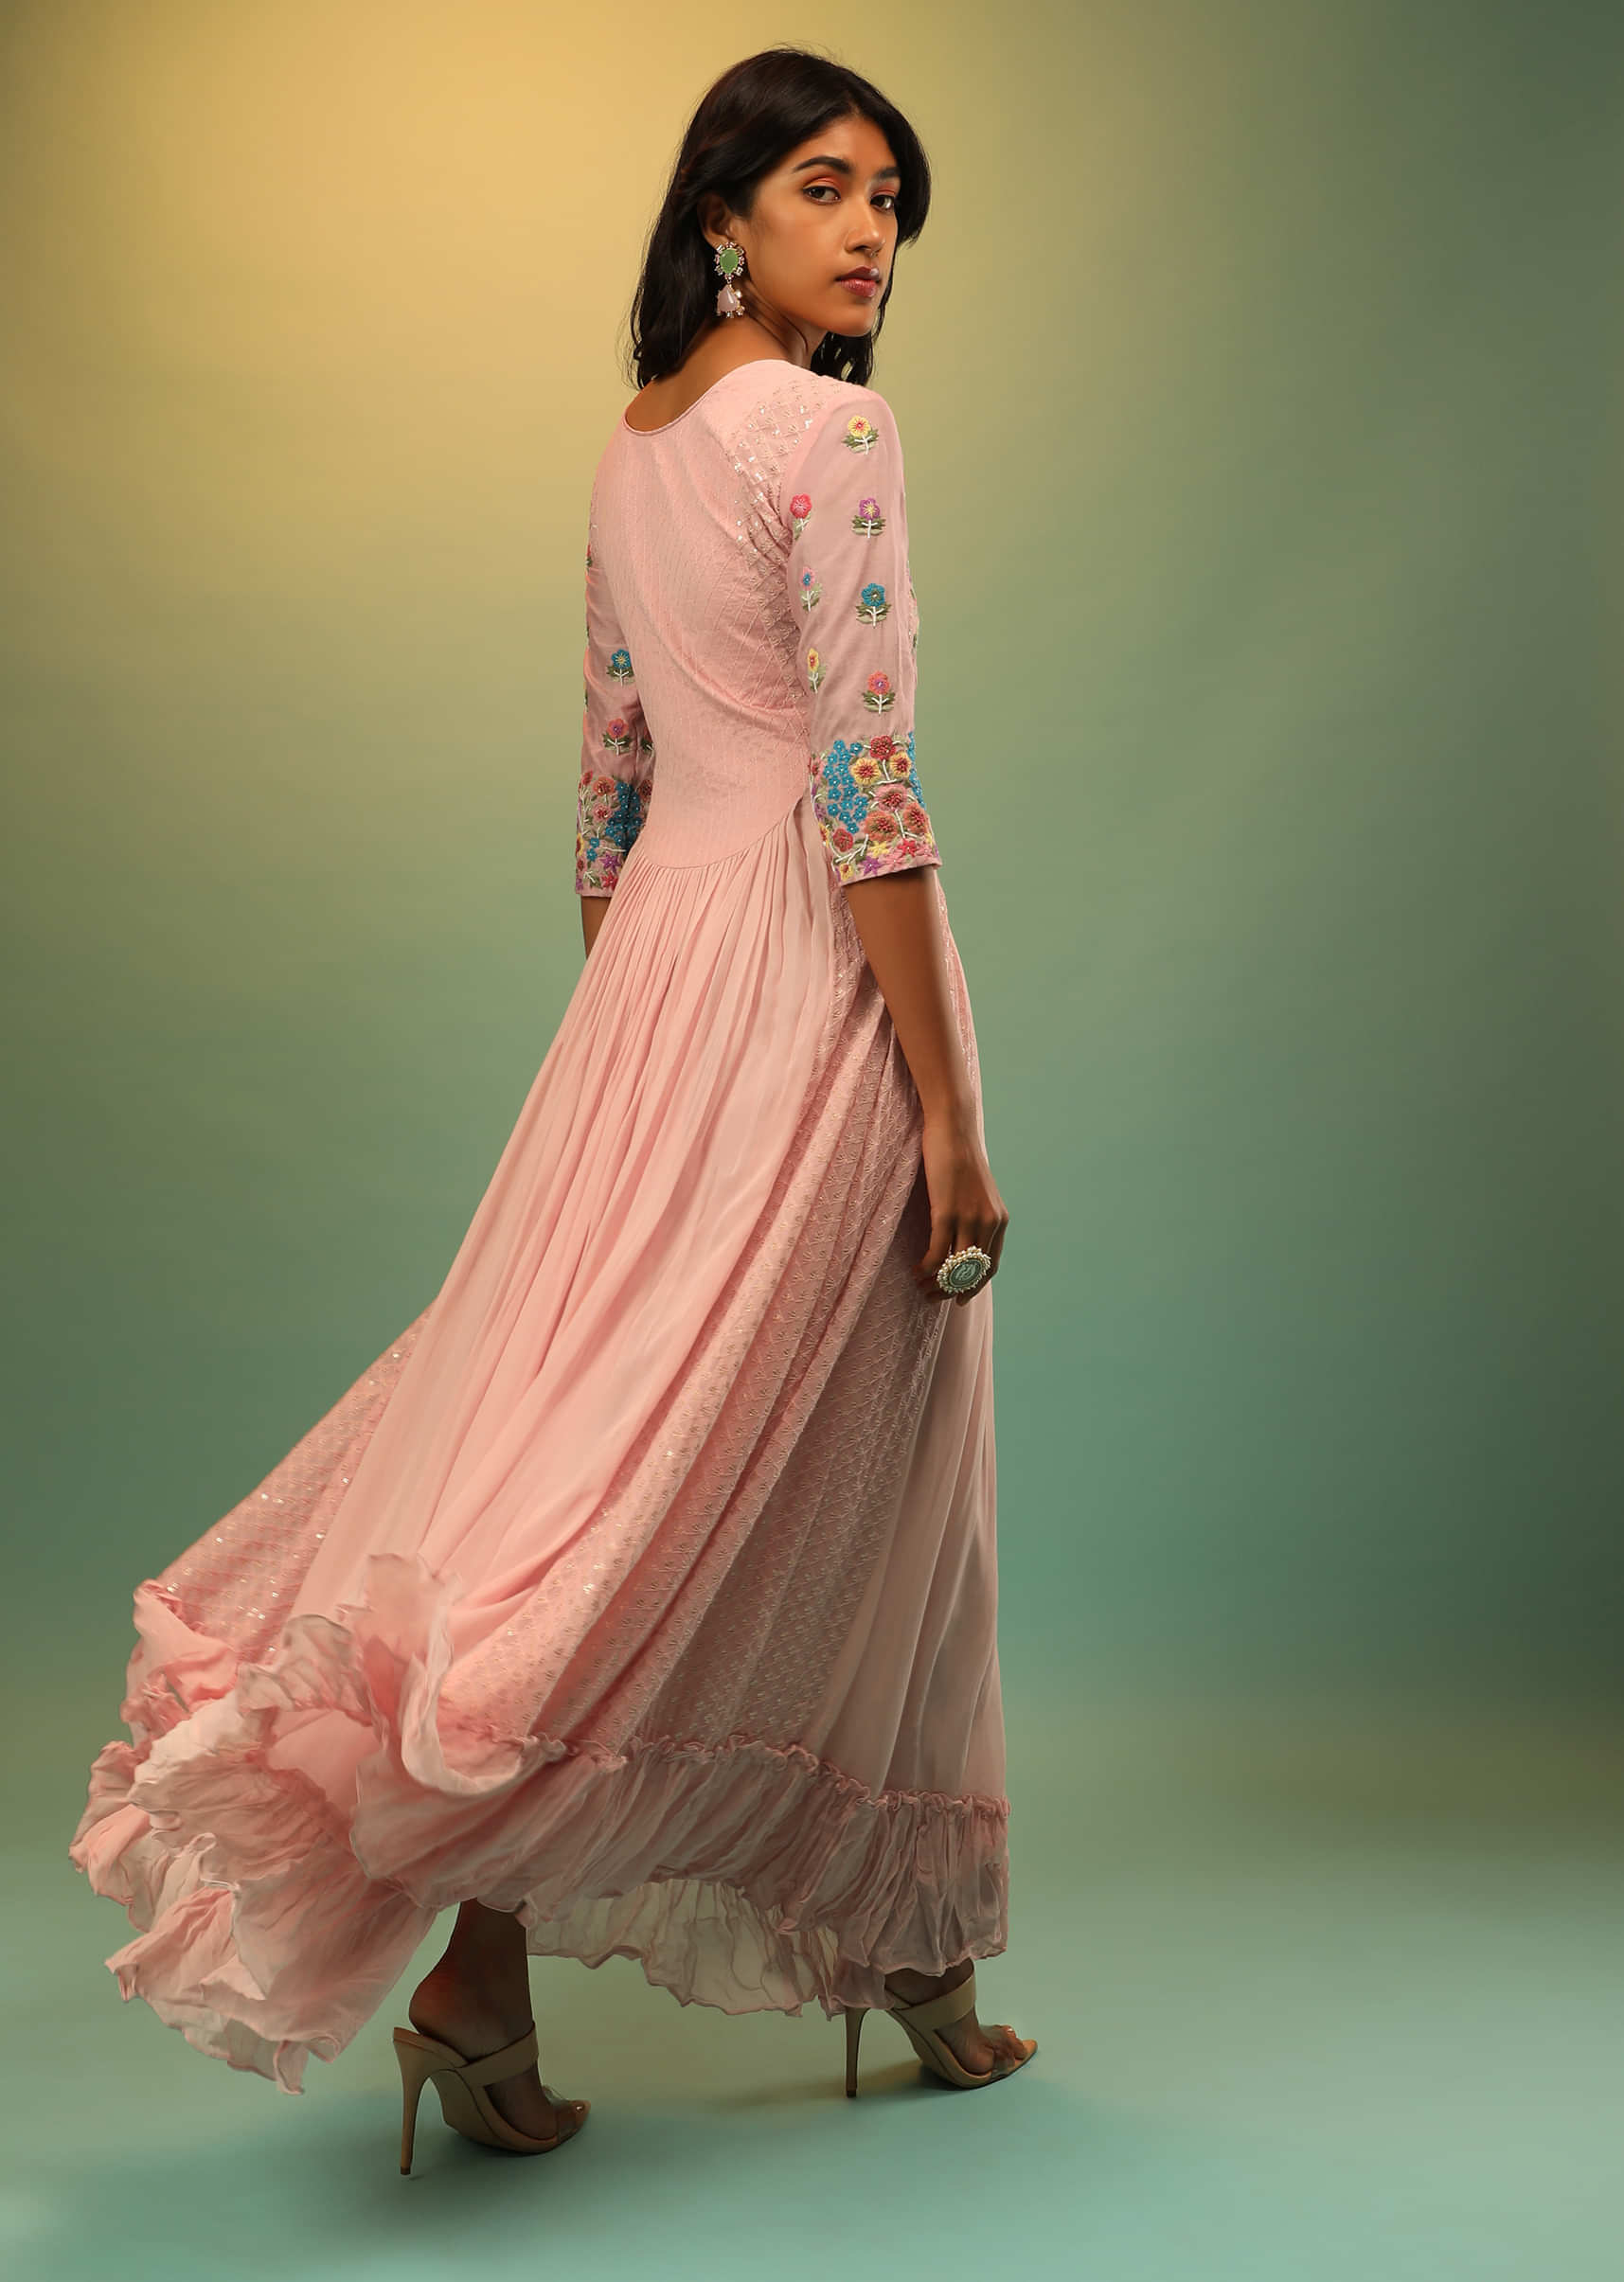 Powder Pink Dress In Georgette With Multi Colored Thread And Beads Embroidered Floral Motifs On The Yoke
  